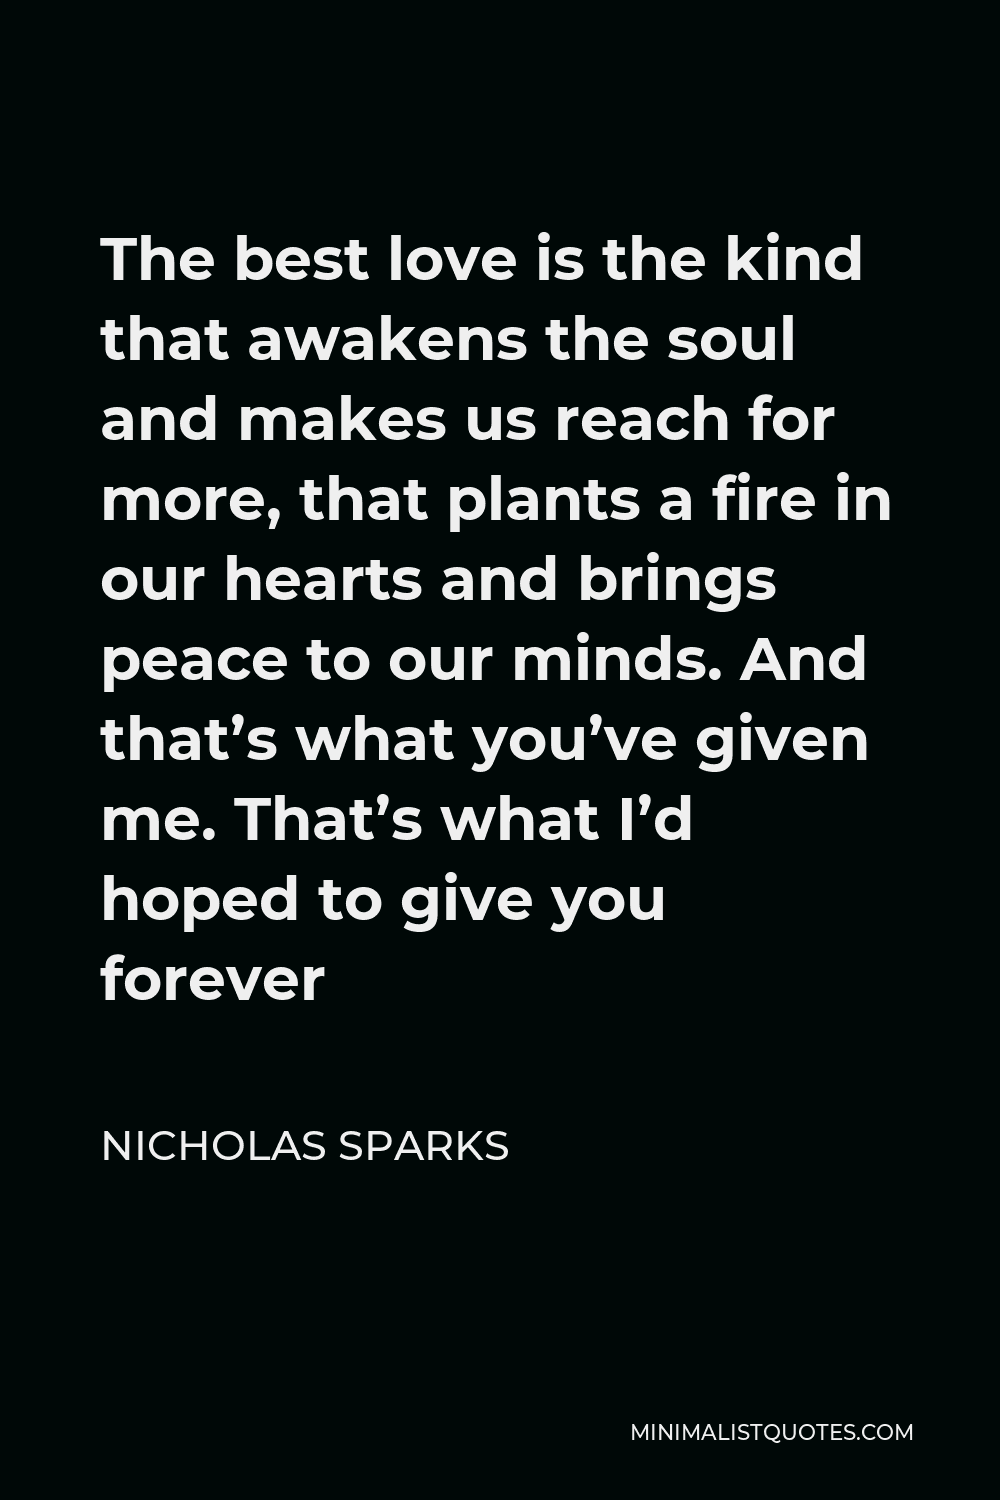 Nicholas Sparks Quote - The best love is the kind that awakens the soul and makes us reach for more, that plants a fire in our hearts and brings peace to our minds. And that’s what you’ve given me. That’s what I’d hoped to give you forever